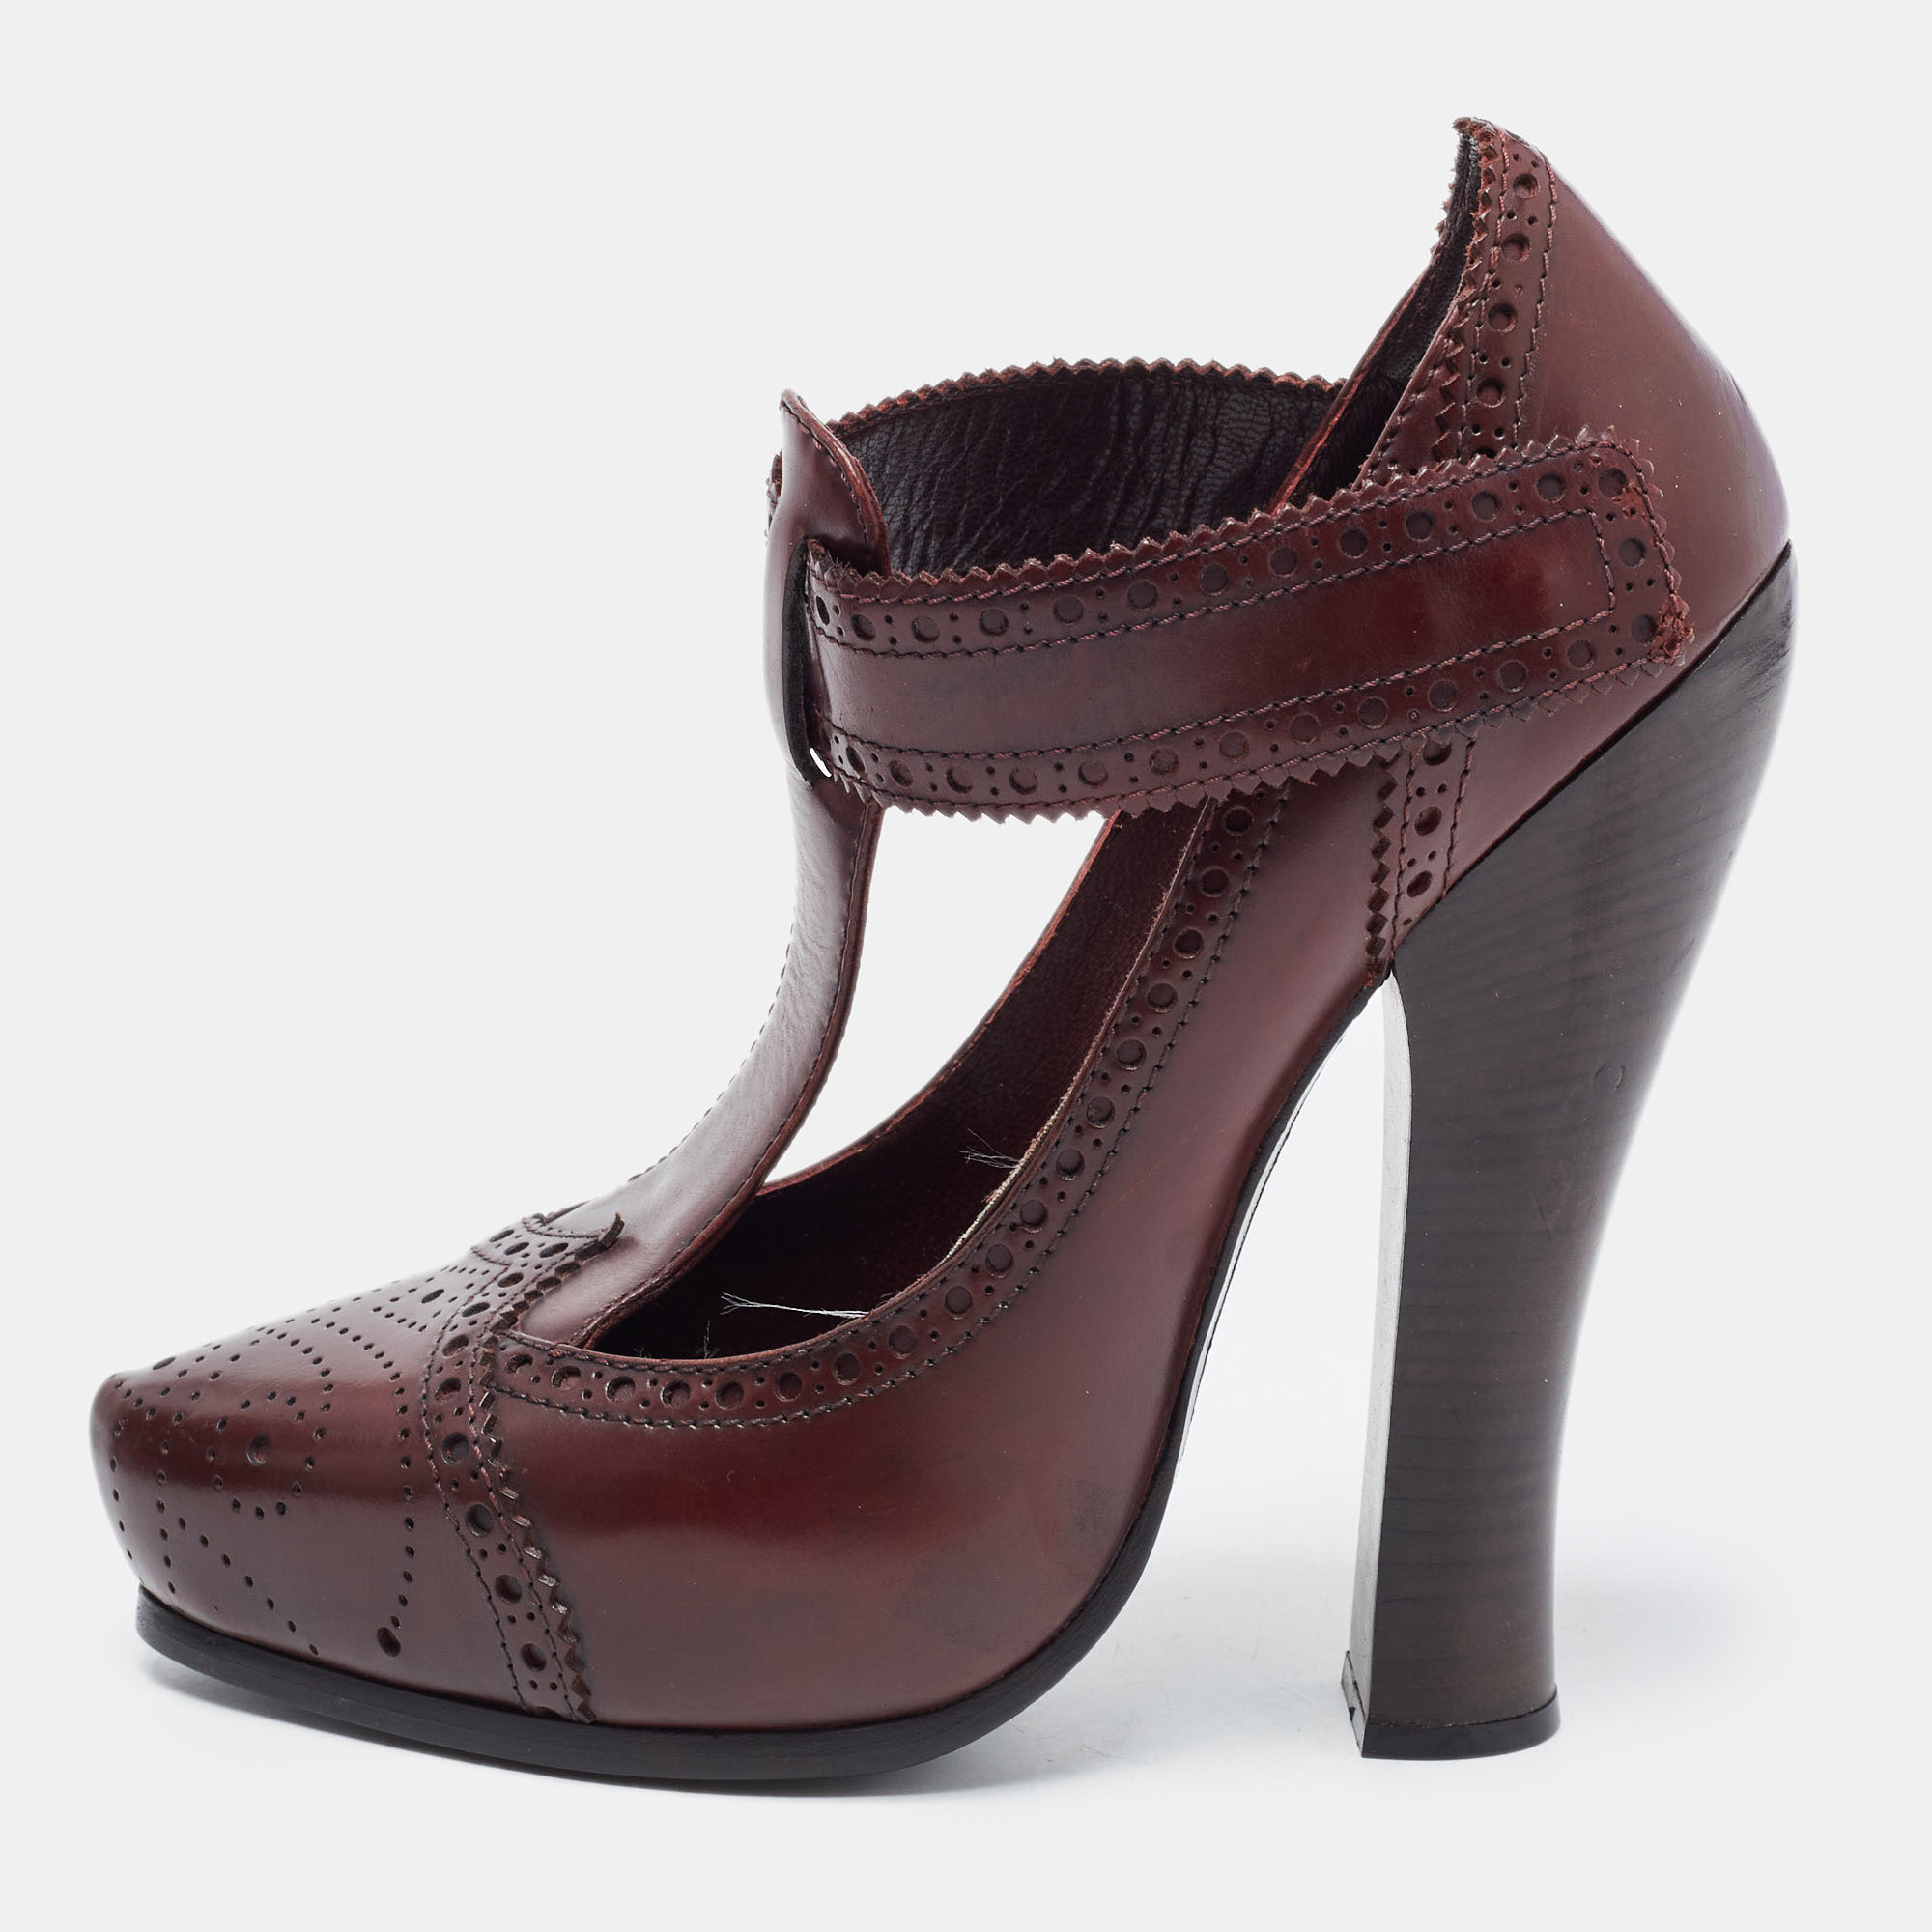 Marc jacobs burgundy leather mary jane pumps size 37